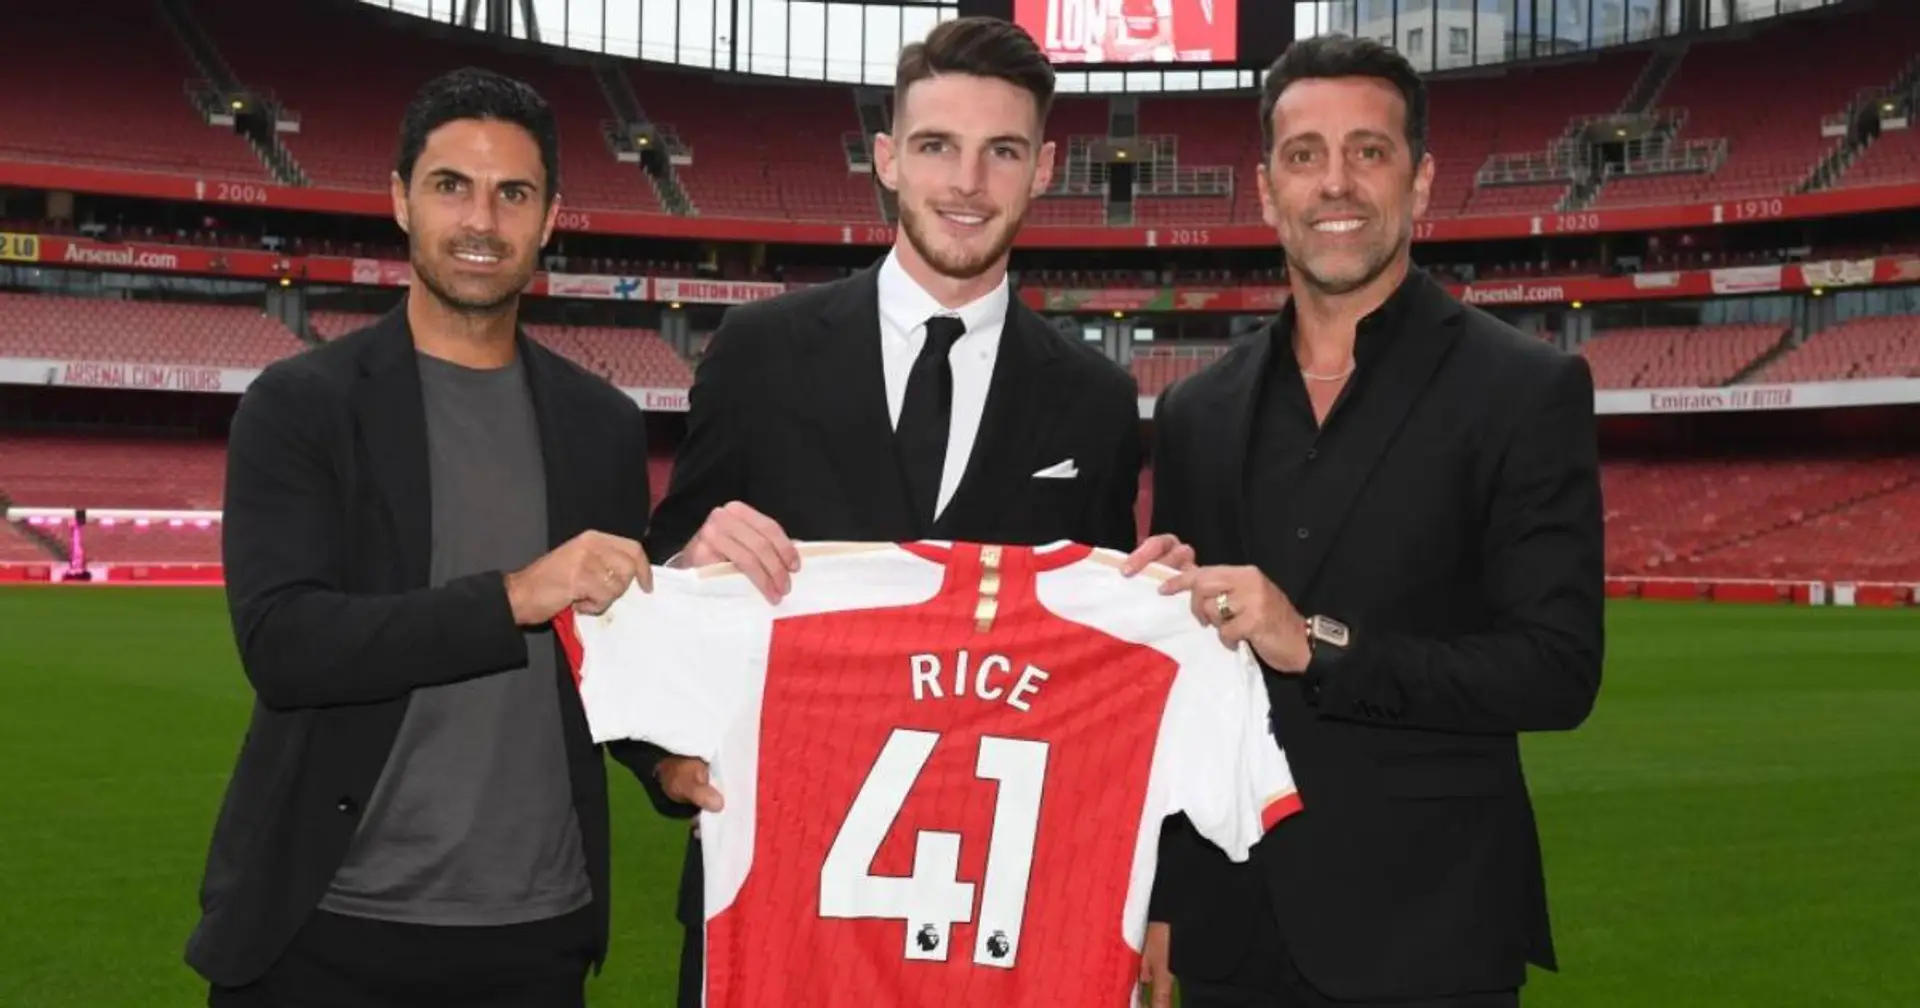 Arsenal fans create epic chant for Rice & 2 latest under-radar stories